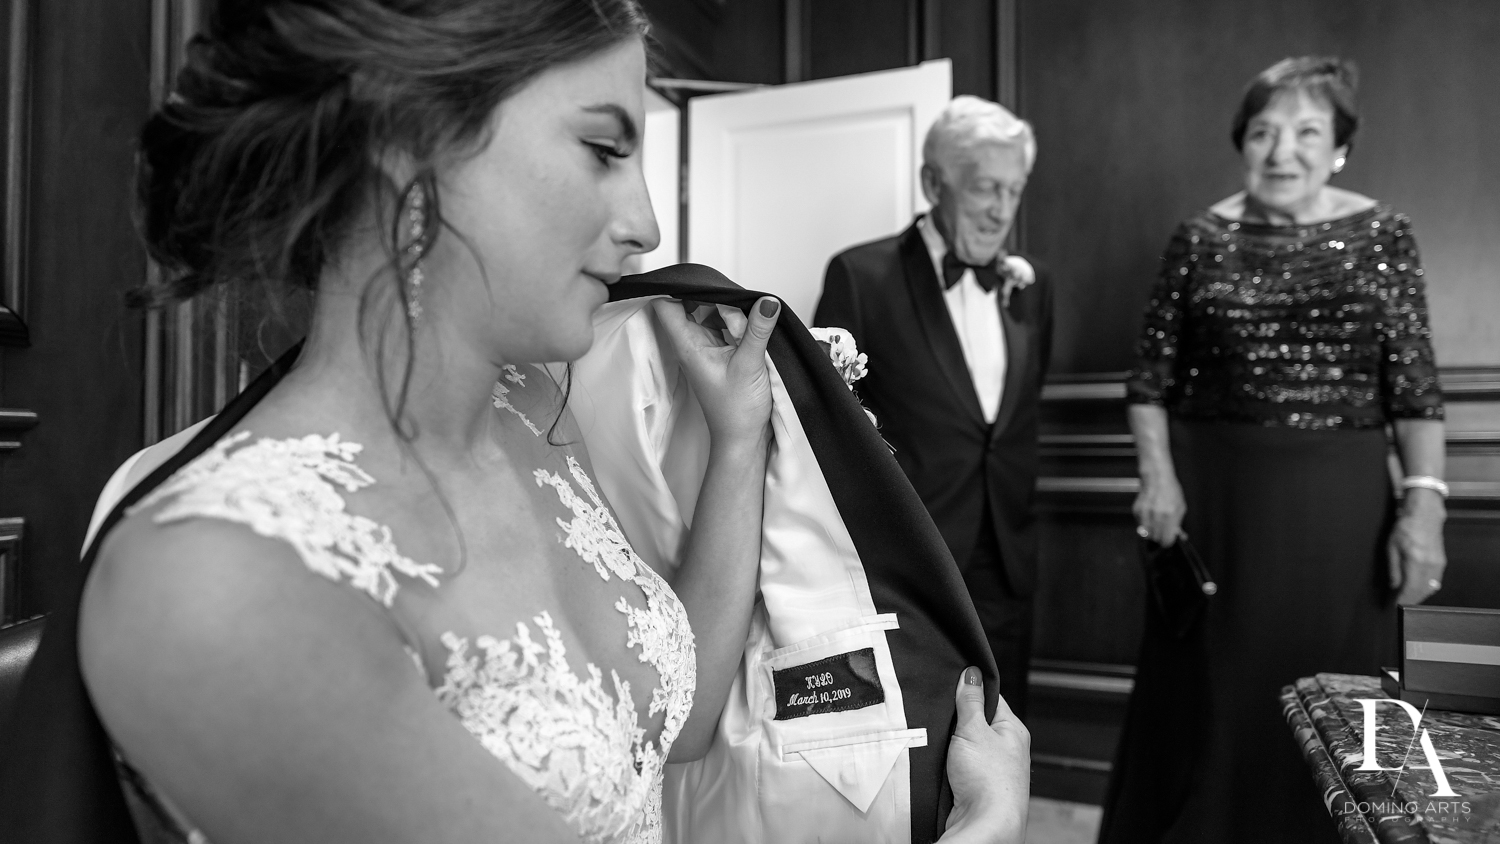 B&W details at Tropical Garden Wedding at Fisher Island Miami by Domino Arts Photography